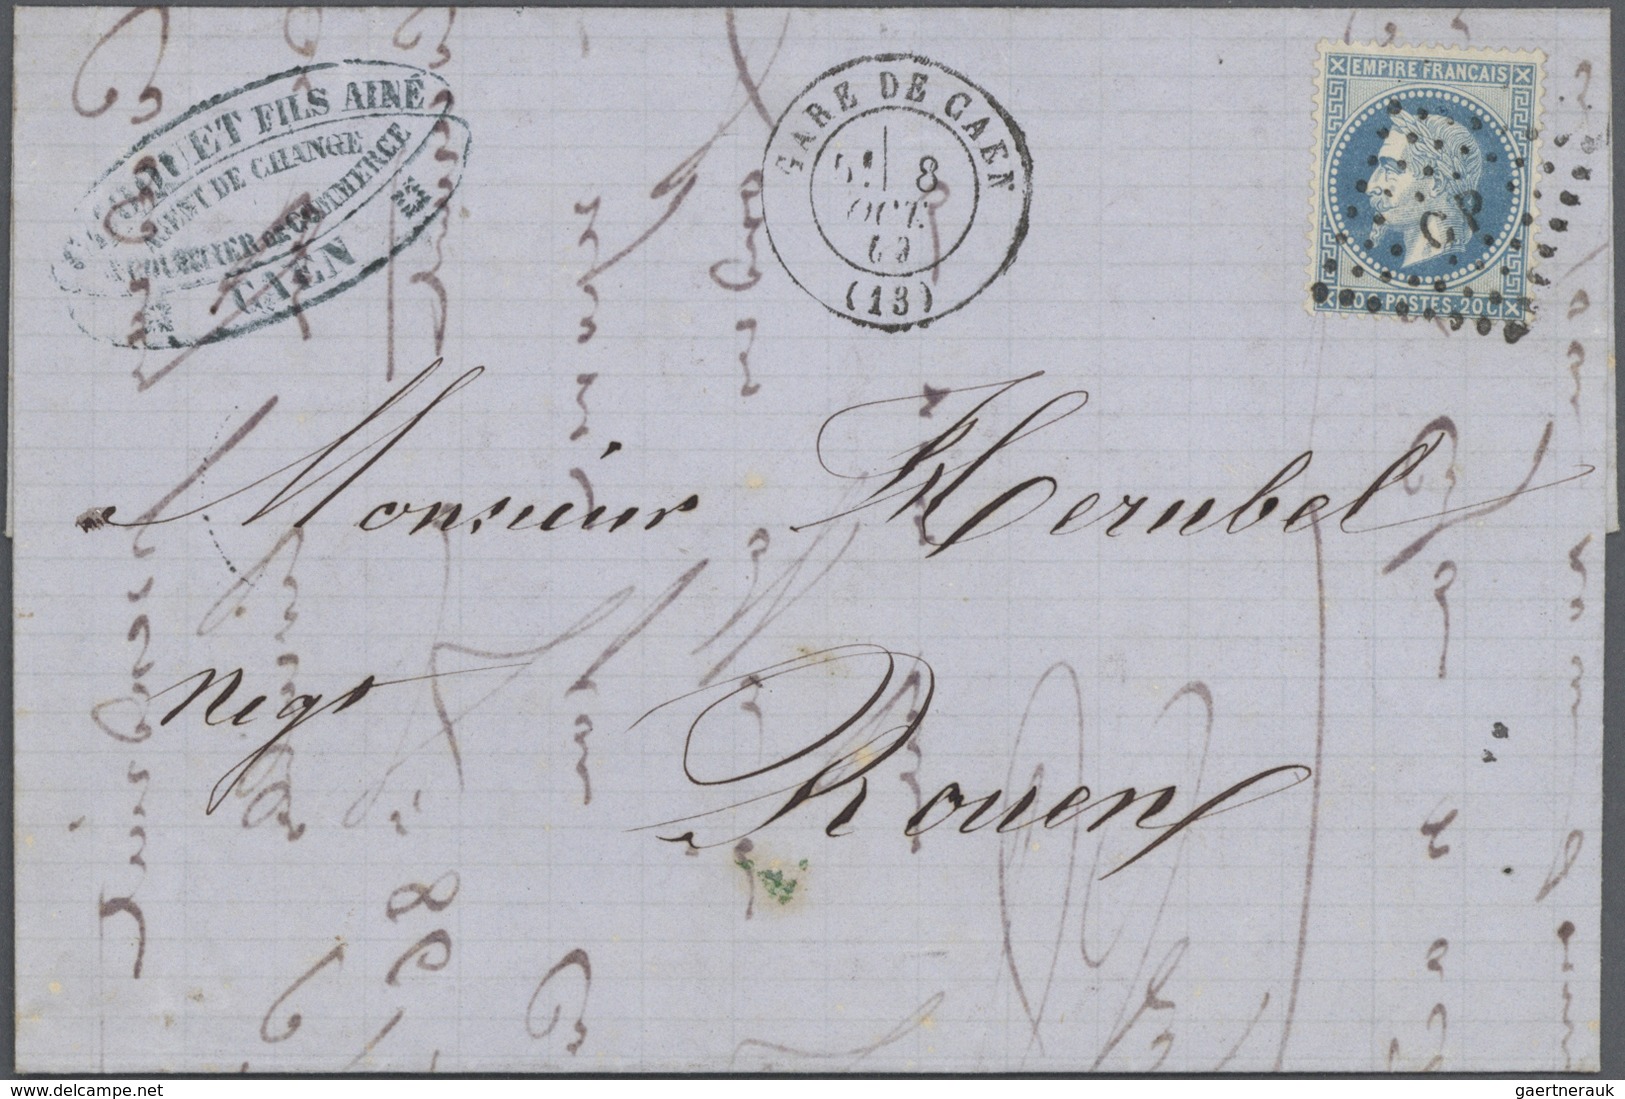 Br/ Frankreich: 1870/1990 (ca.), FRENCH RAILWAY, accumulation of apprx. 180 entires: apprx. 100 (mainly